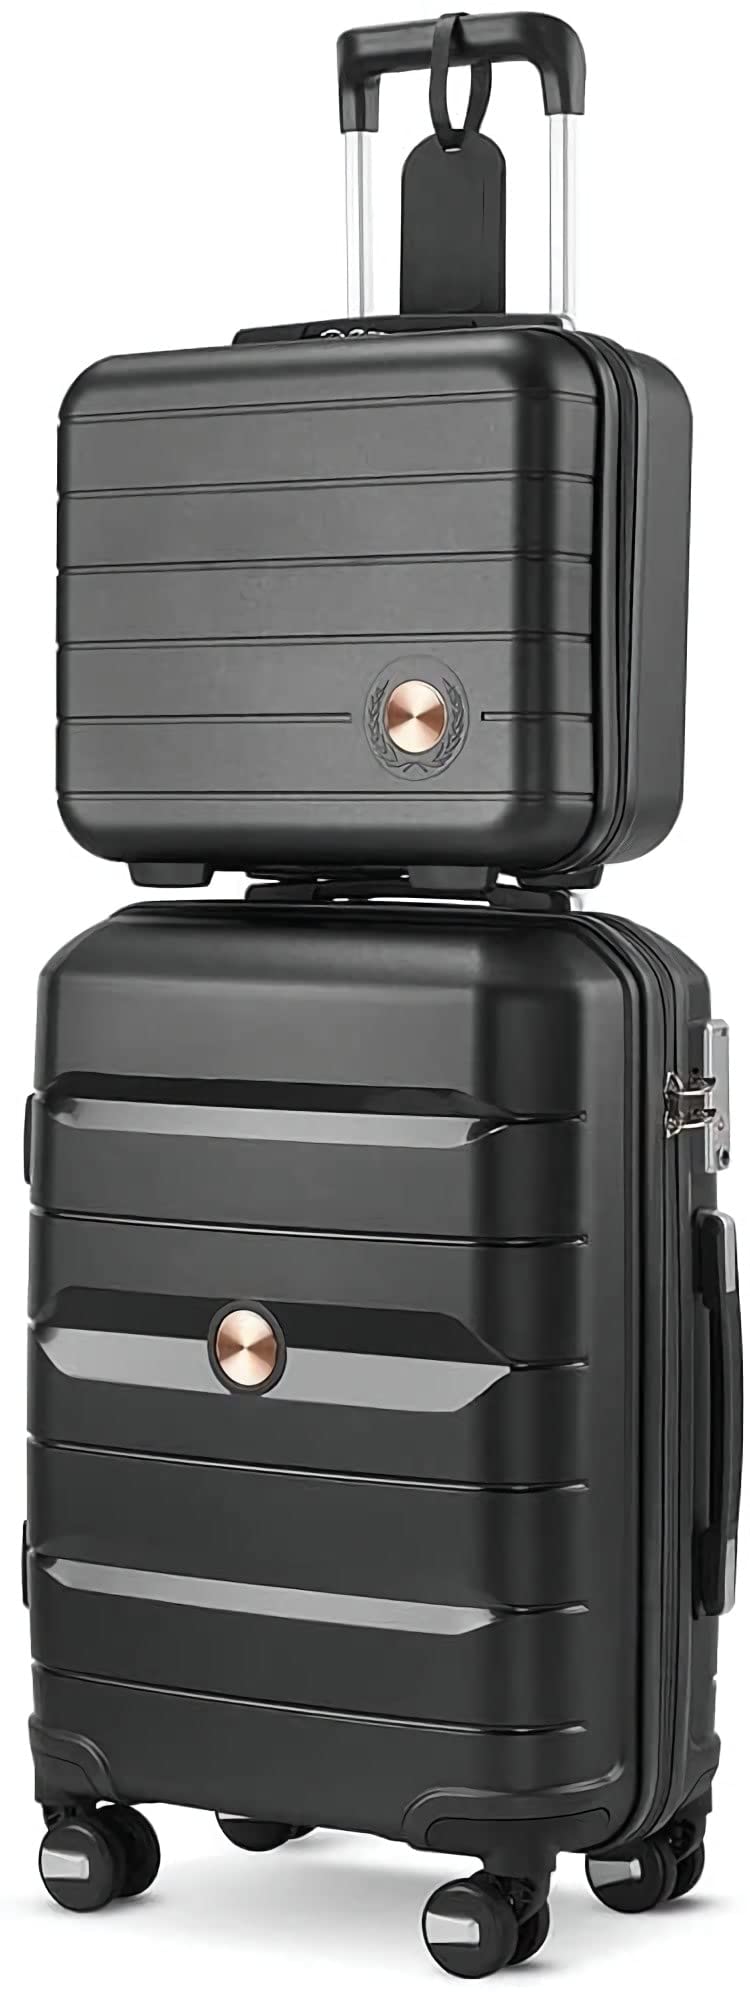 Luggage Sets Lightweight Clearance Expandable Hardside with Spinner Wheels for Travel(Black,2-Piece Set)